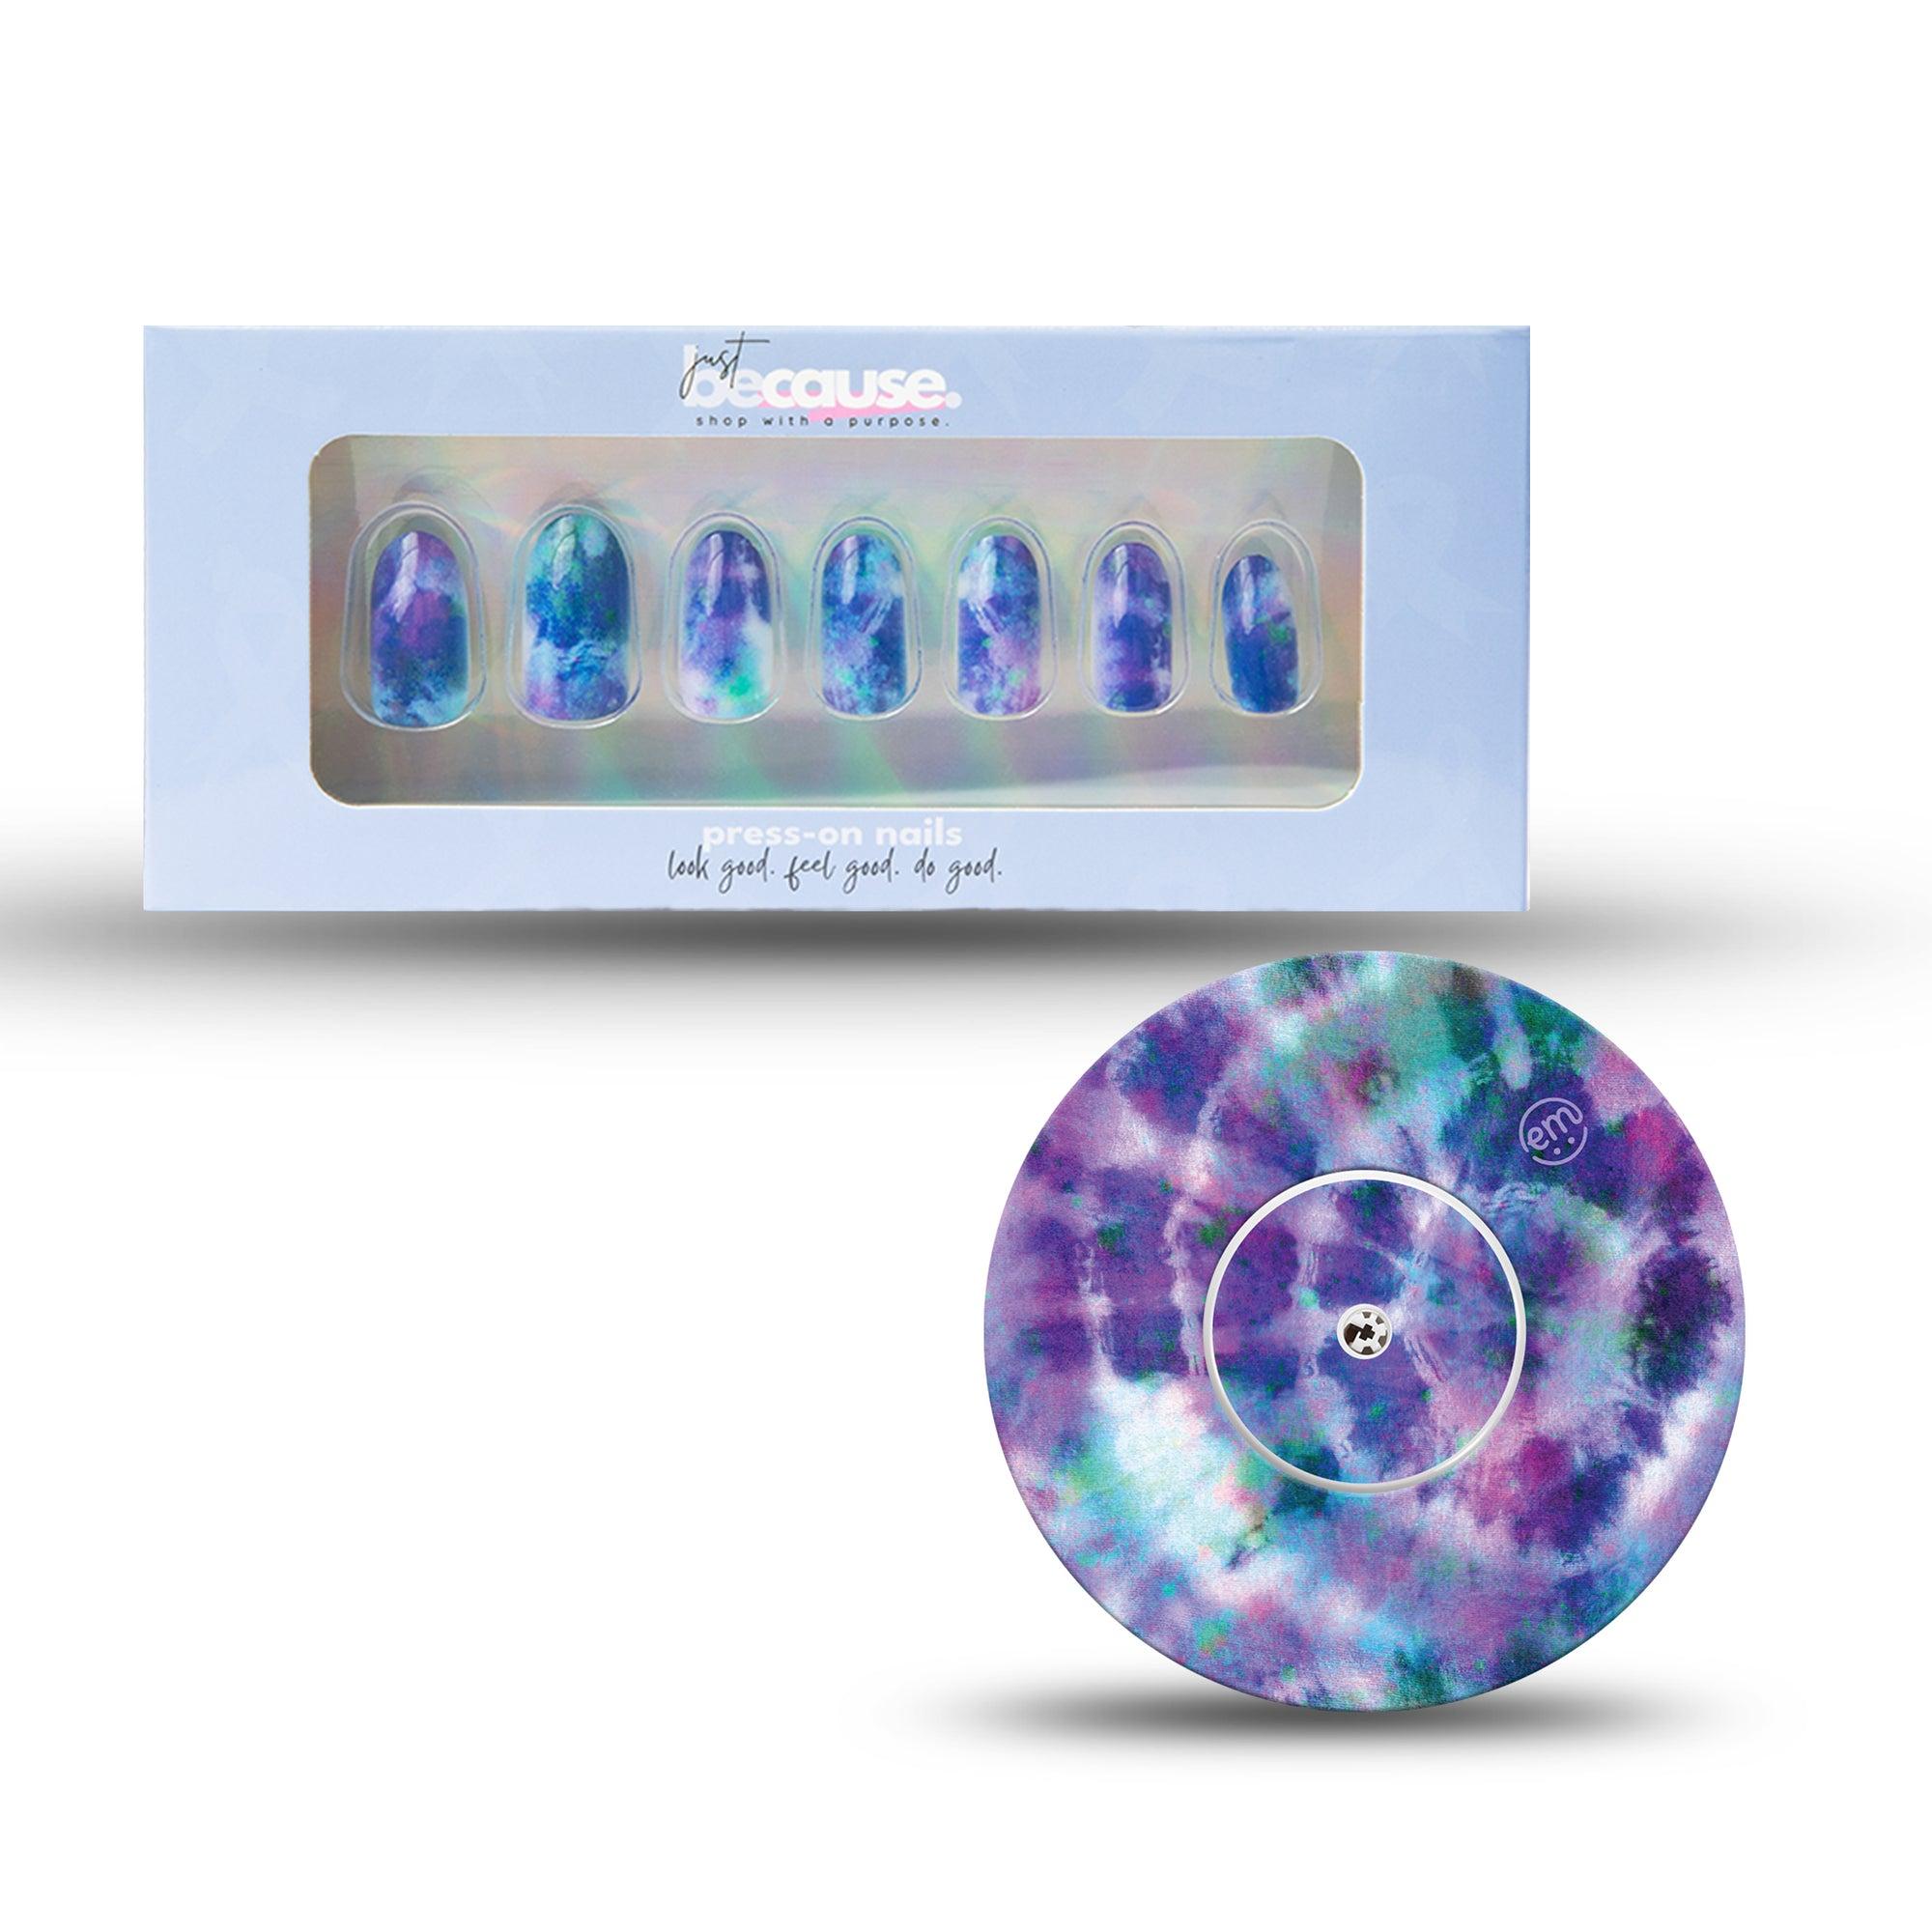 ExpressionMed Just BeCause 24 Pcs ABS Press on nails Medium, Purple and Blue Tie Dye Fake Nails set with matching Purple Tie Dye Libre 2 Adhesive Tape and Center Sticker, Support T1D - ExpressionMed.com	